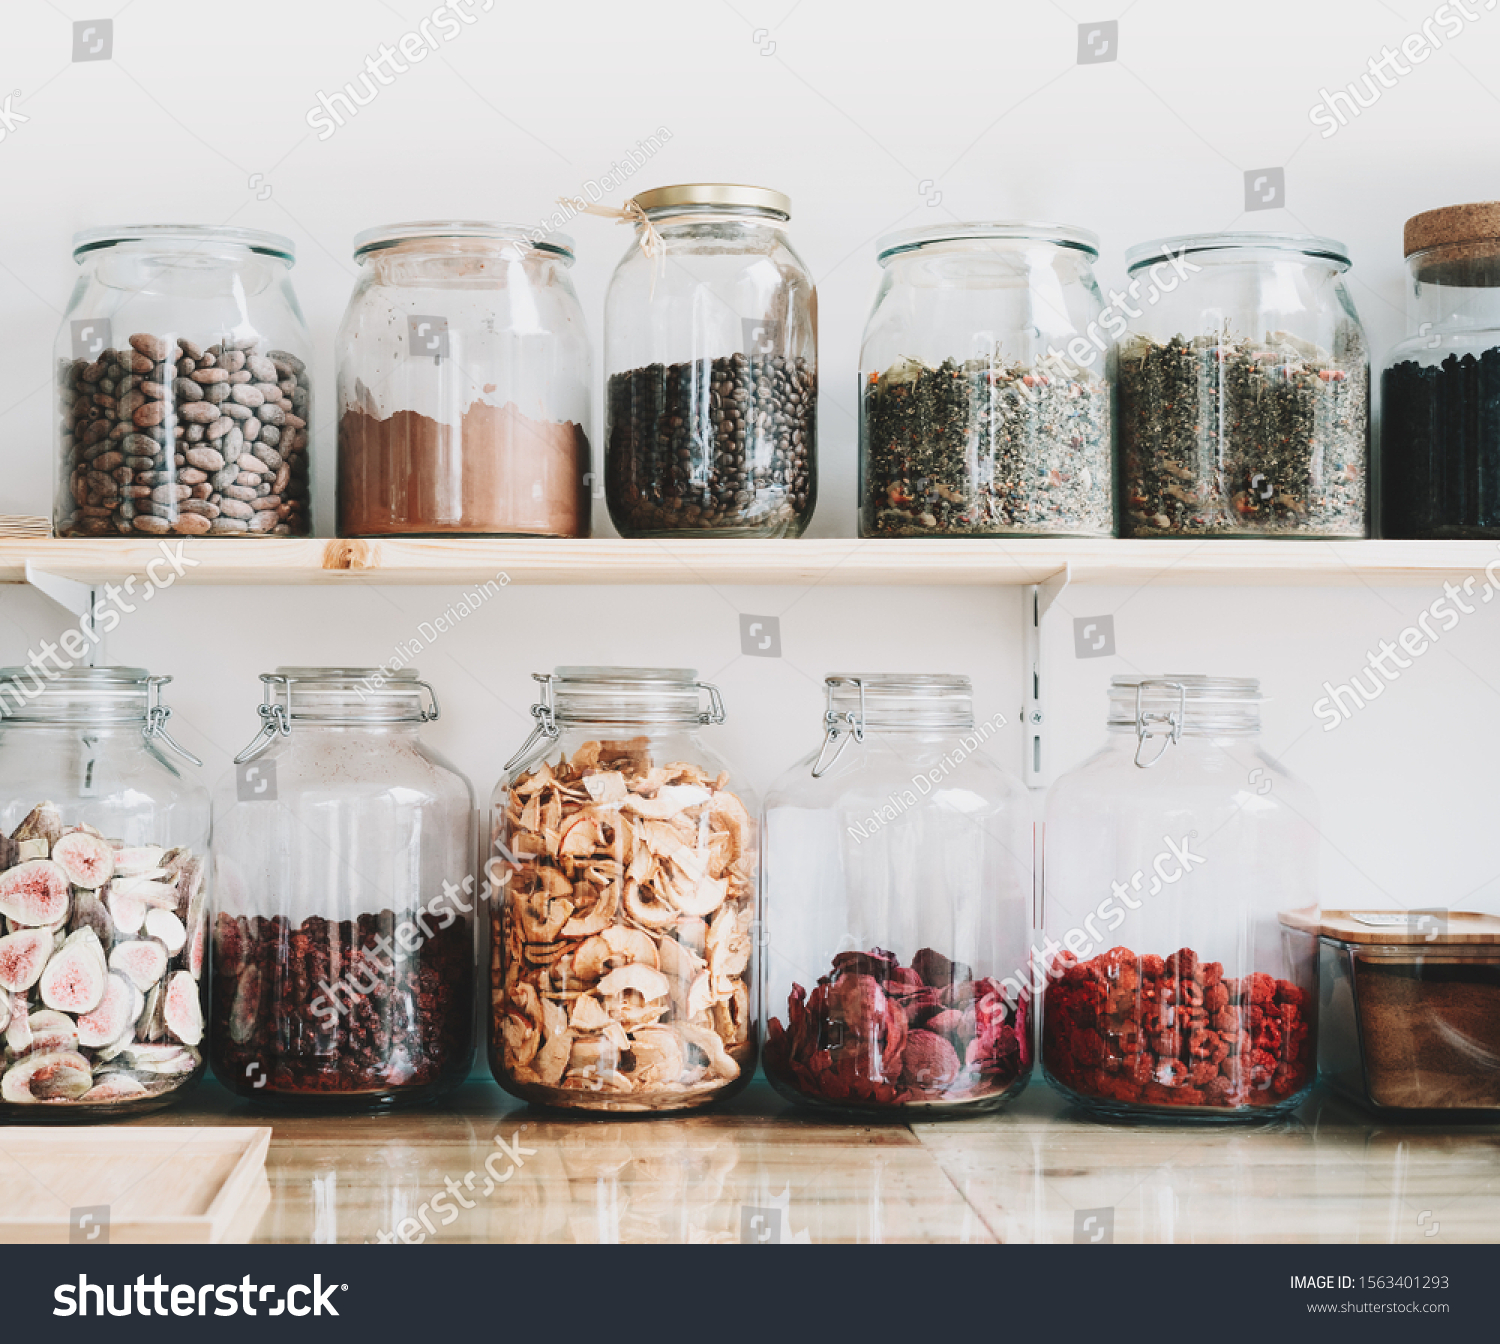 Organic bulk products in zero waste shop. Foods storage in kitchen at low waste lifestyle. Dried berries and fruits in glass jars on shelves. Eco friendly shopping in plastic free grocery store. #1563401293